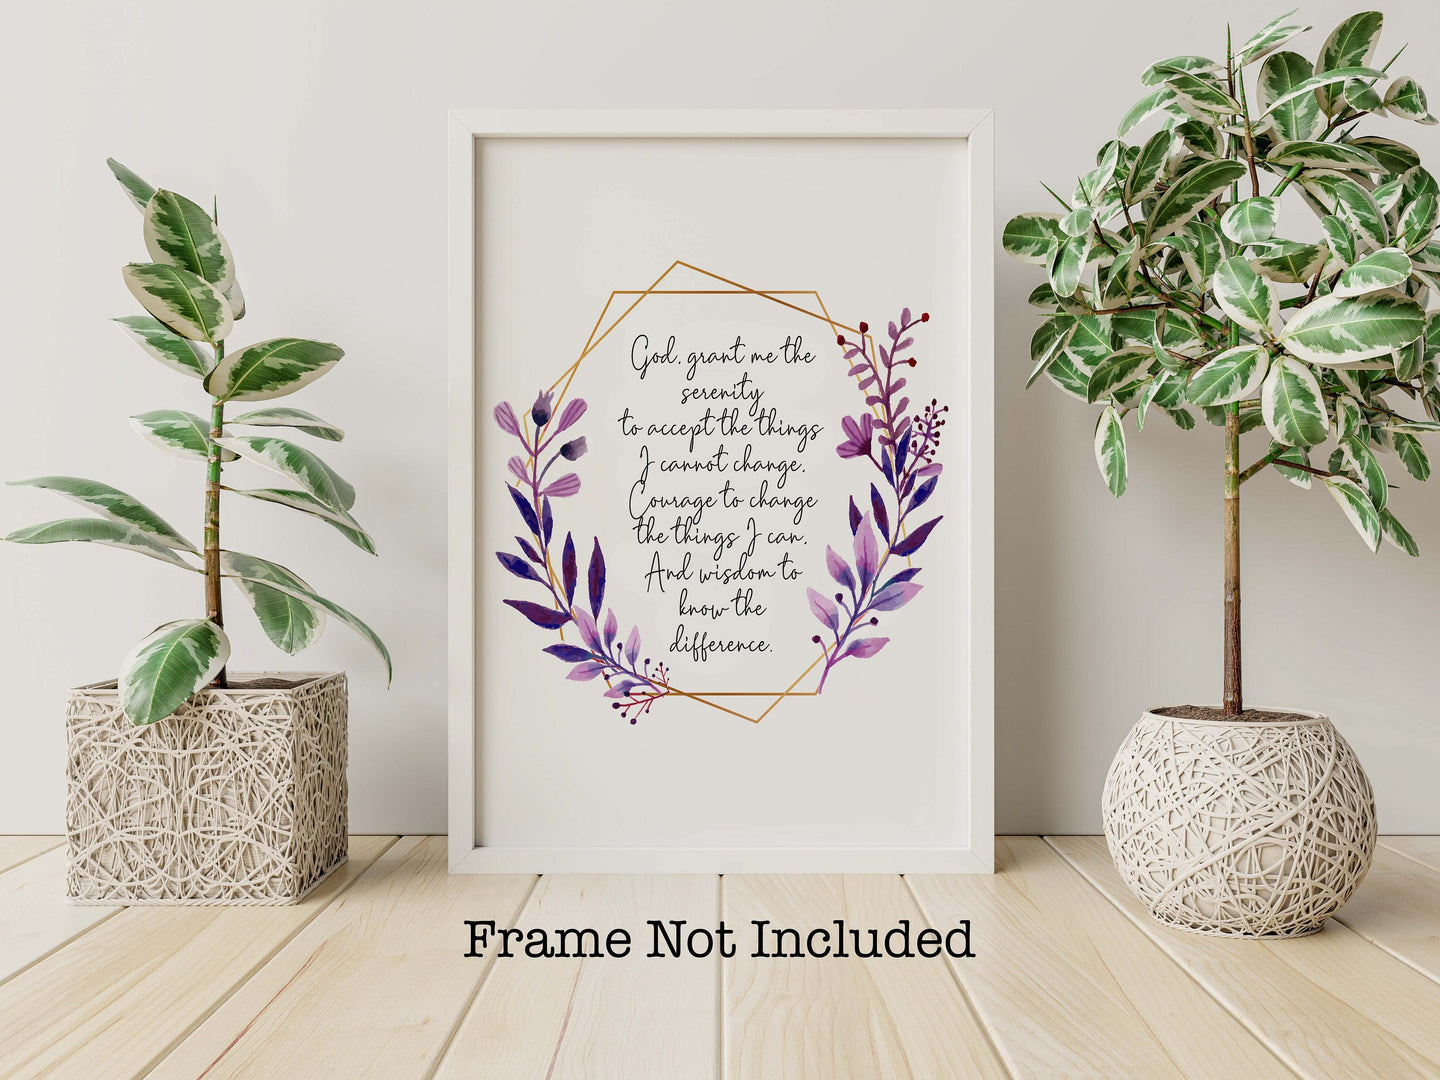 The Serenity Prayer Print - Reinhold Niebuhr - sobriety gift Alcoholics Anonymous twelve step recovery - Framed and Unframed Options